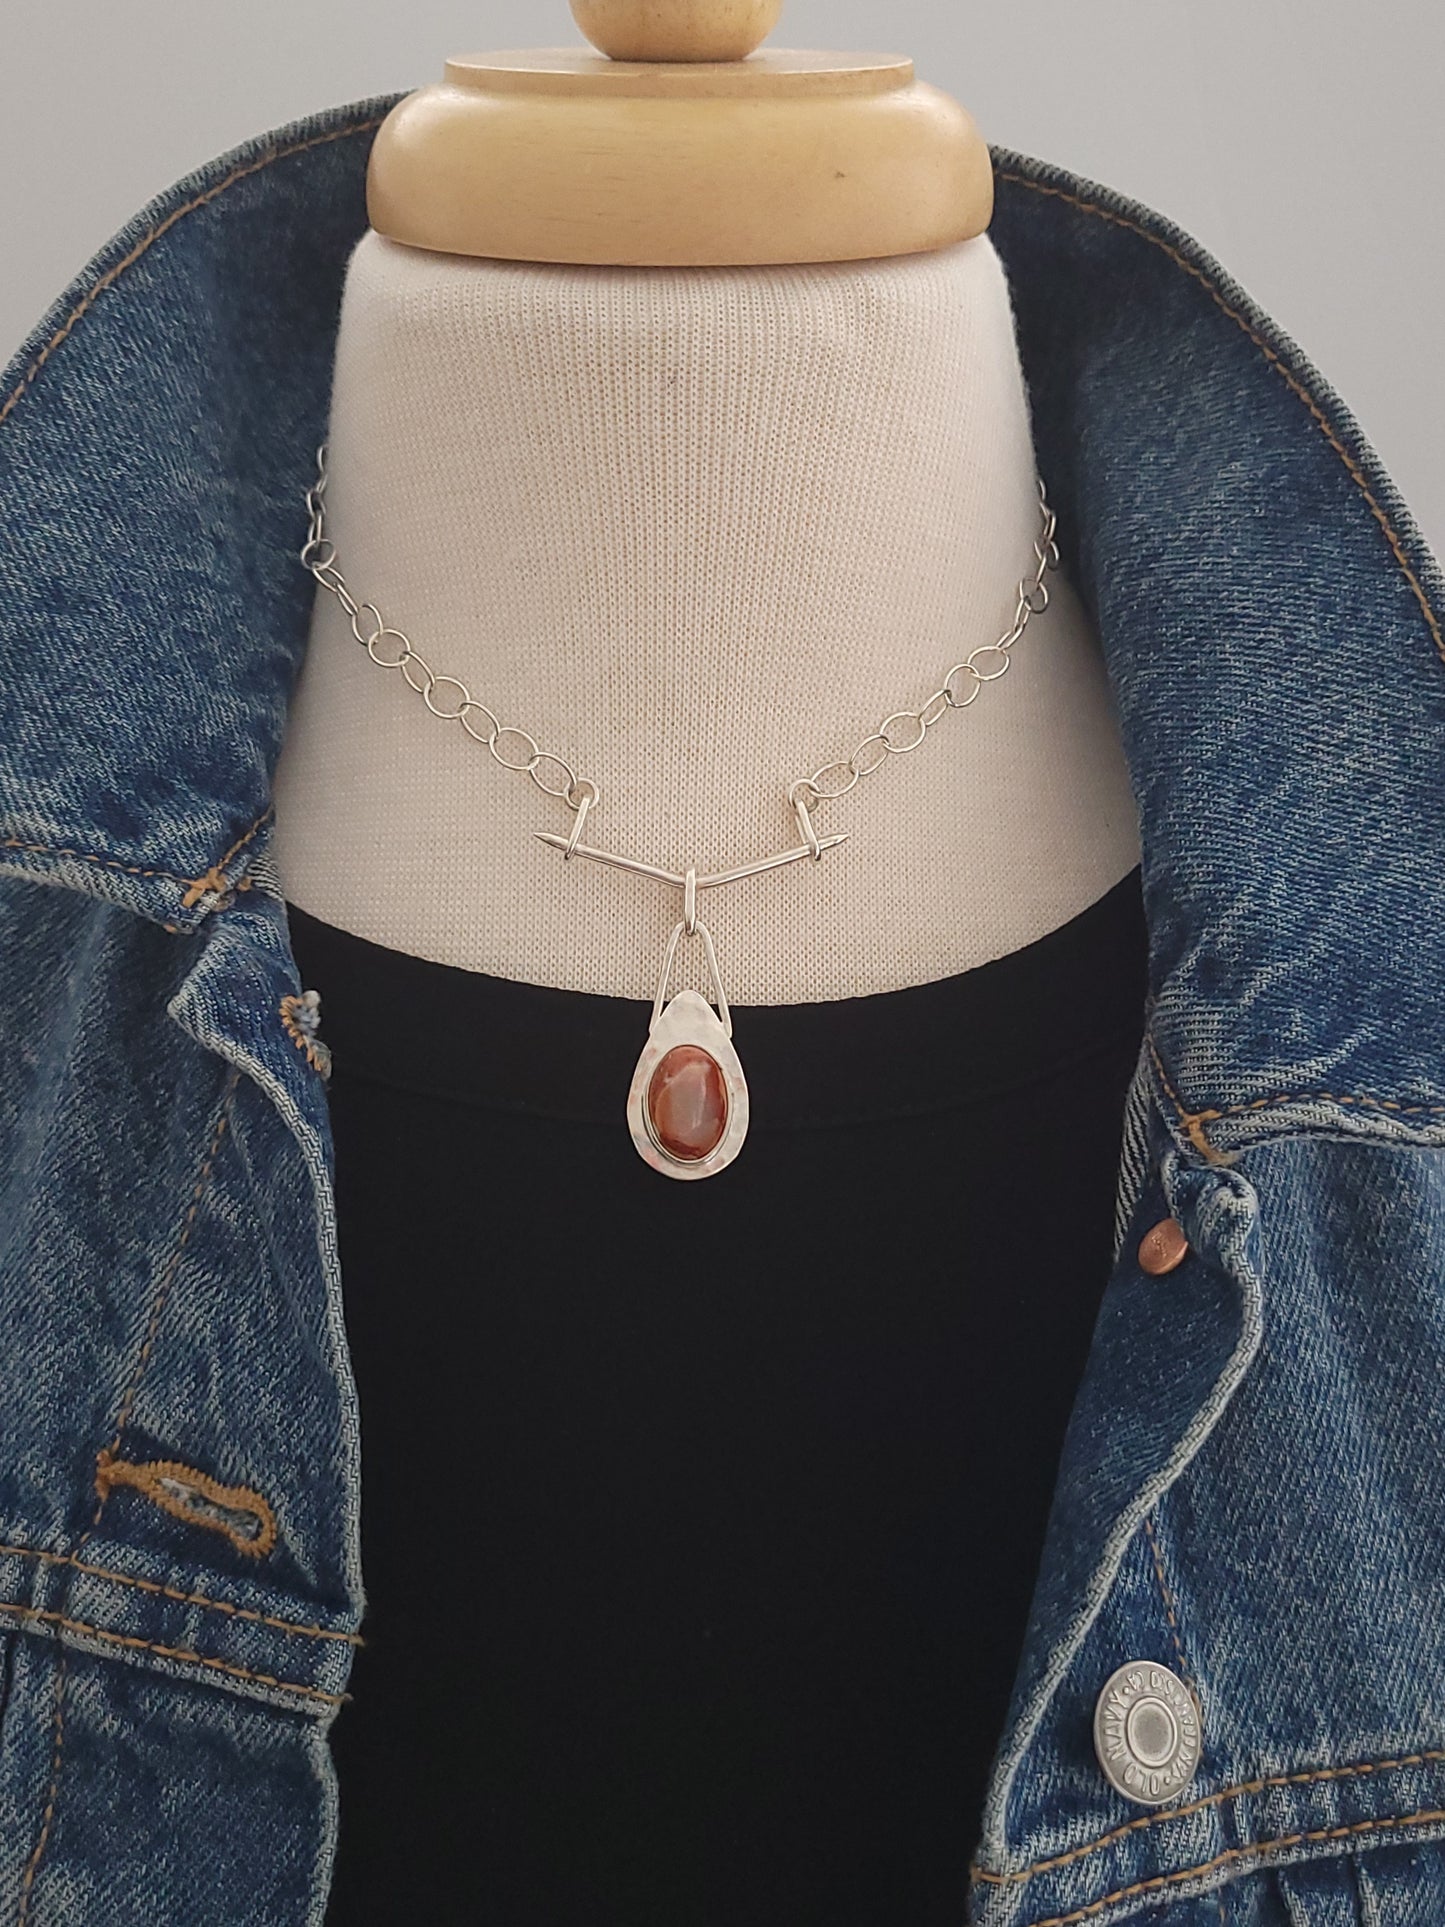 Floating Mexican Fire Opal Necklace